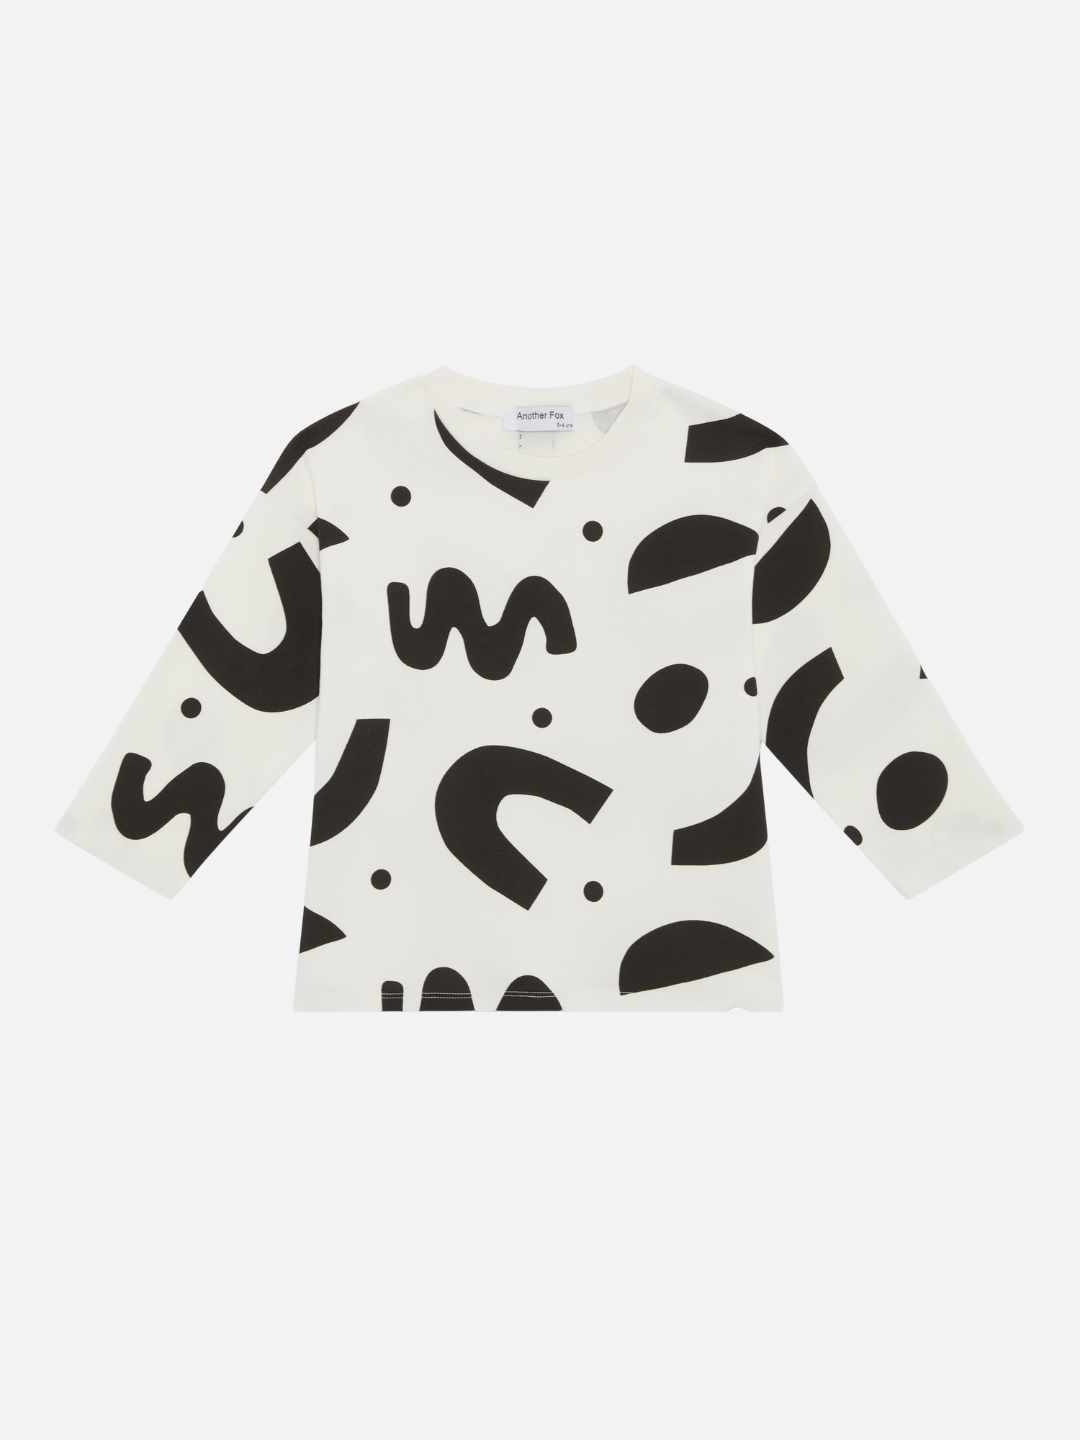 A kids' long-sleeved tee shirt printed with black squiggles and dots on a white background